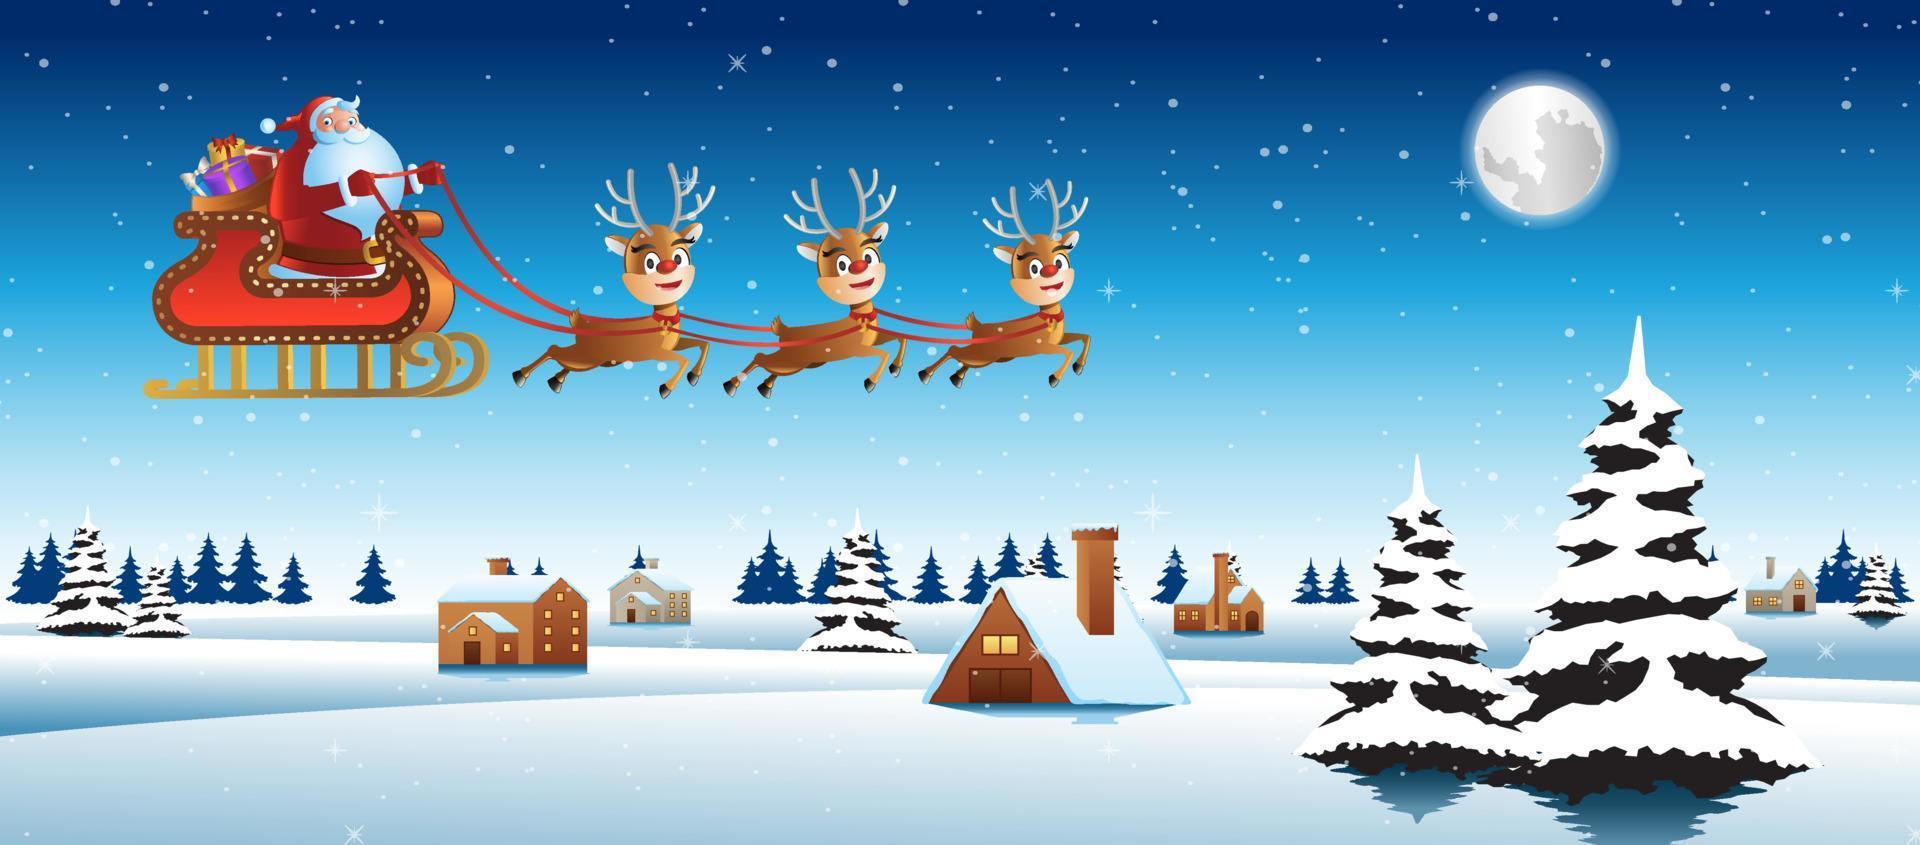 Santa claus ride sleigh with deer fly over village to send gift to everyone vector